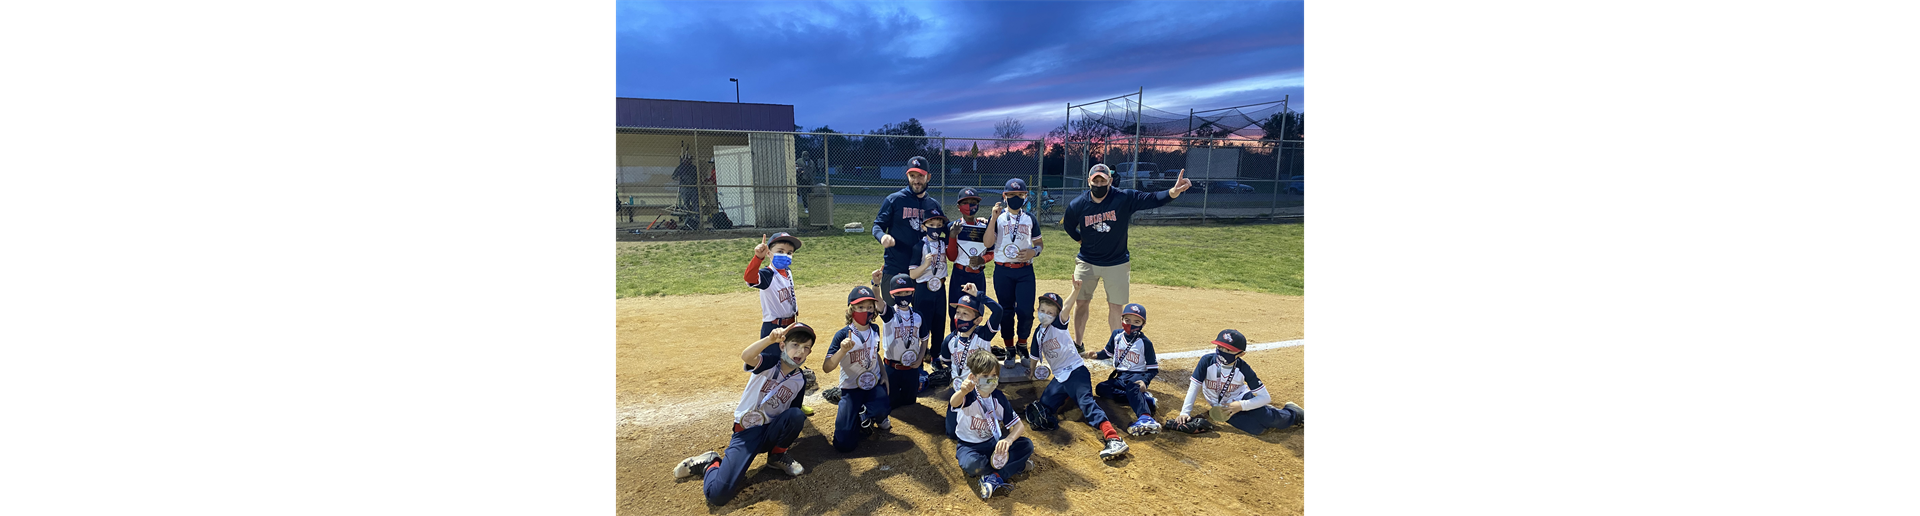 Congratulations to the Philly Dragons 8U Team